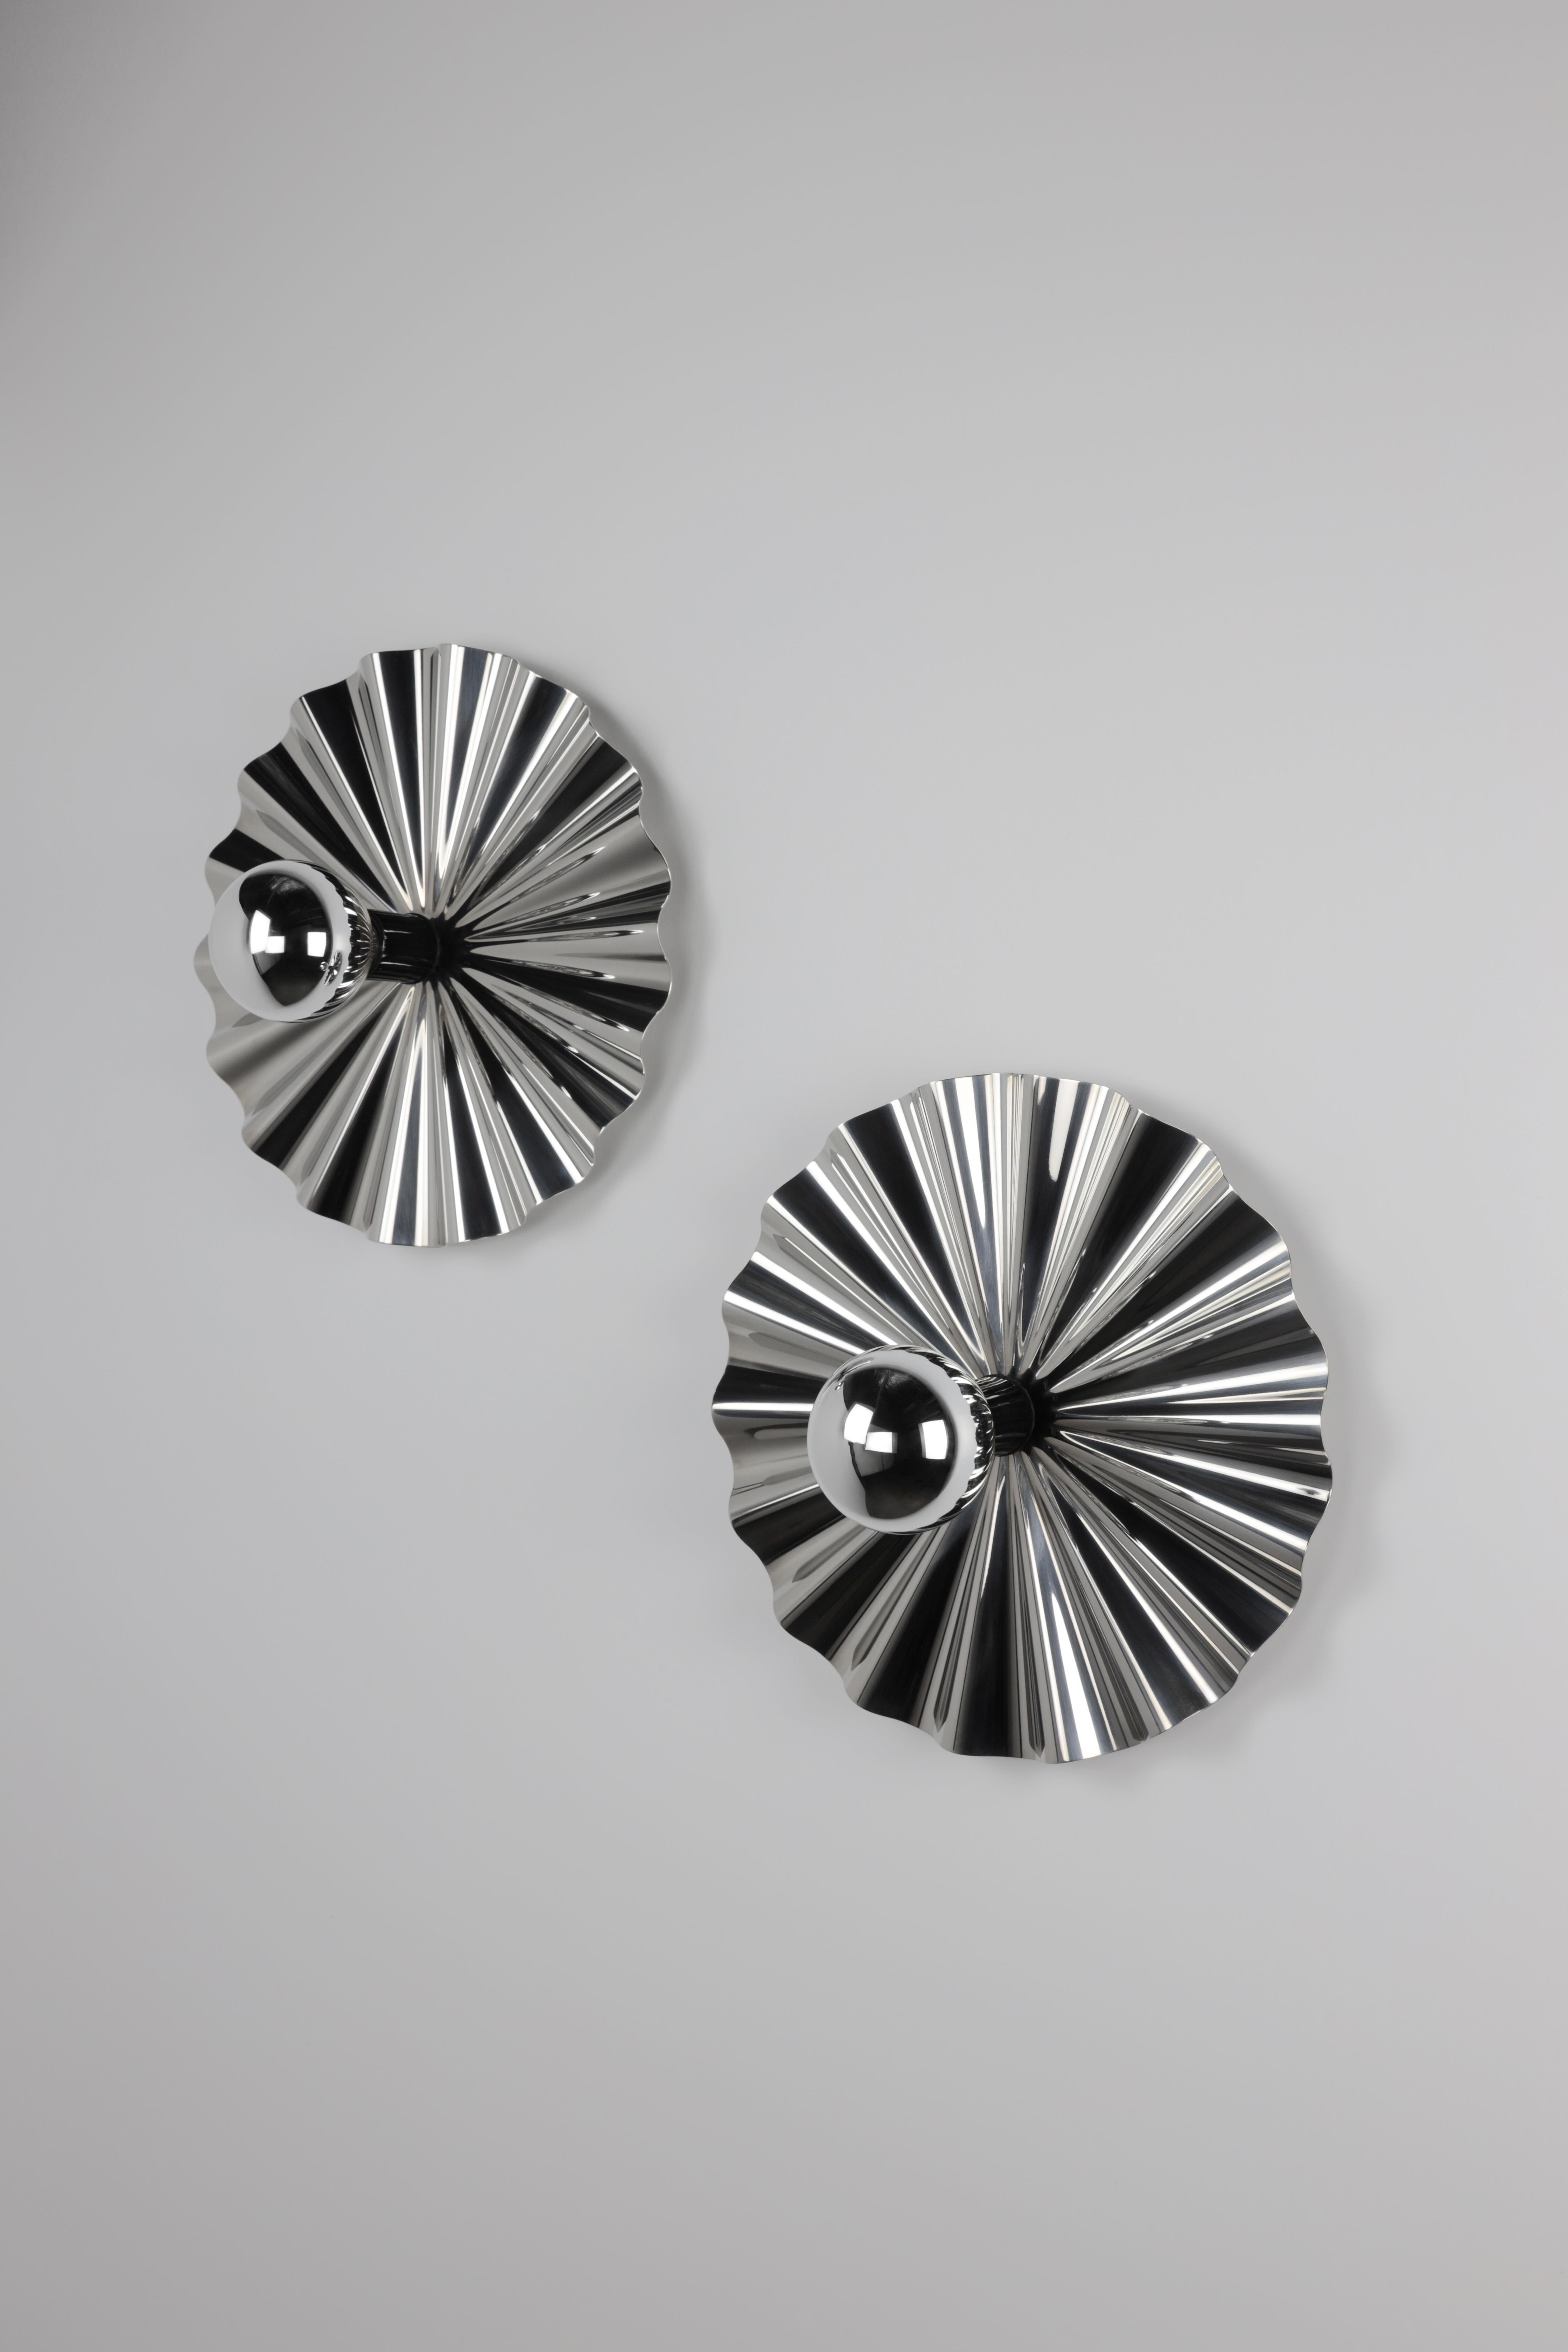 Contemporary Starburst Sconce in Stainless with Half Dipped Bulb by Christopher Kreiling For Sale